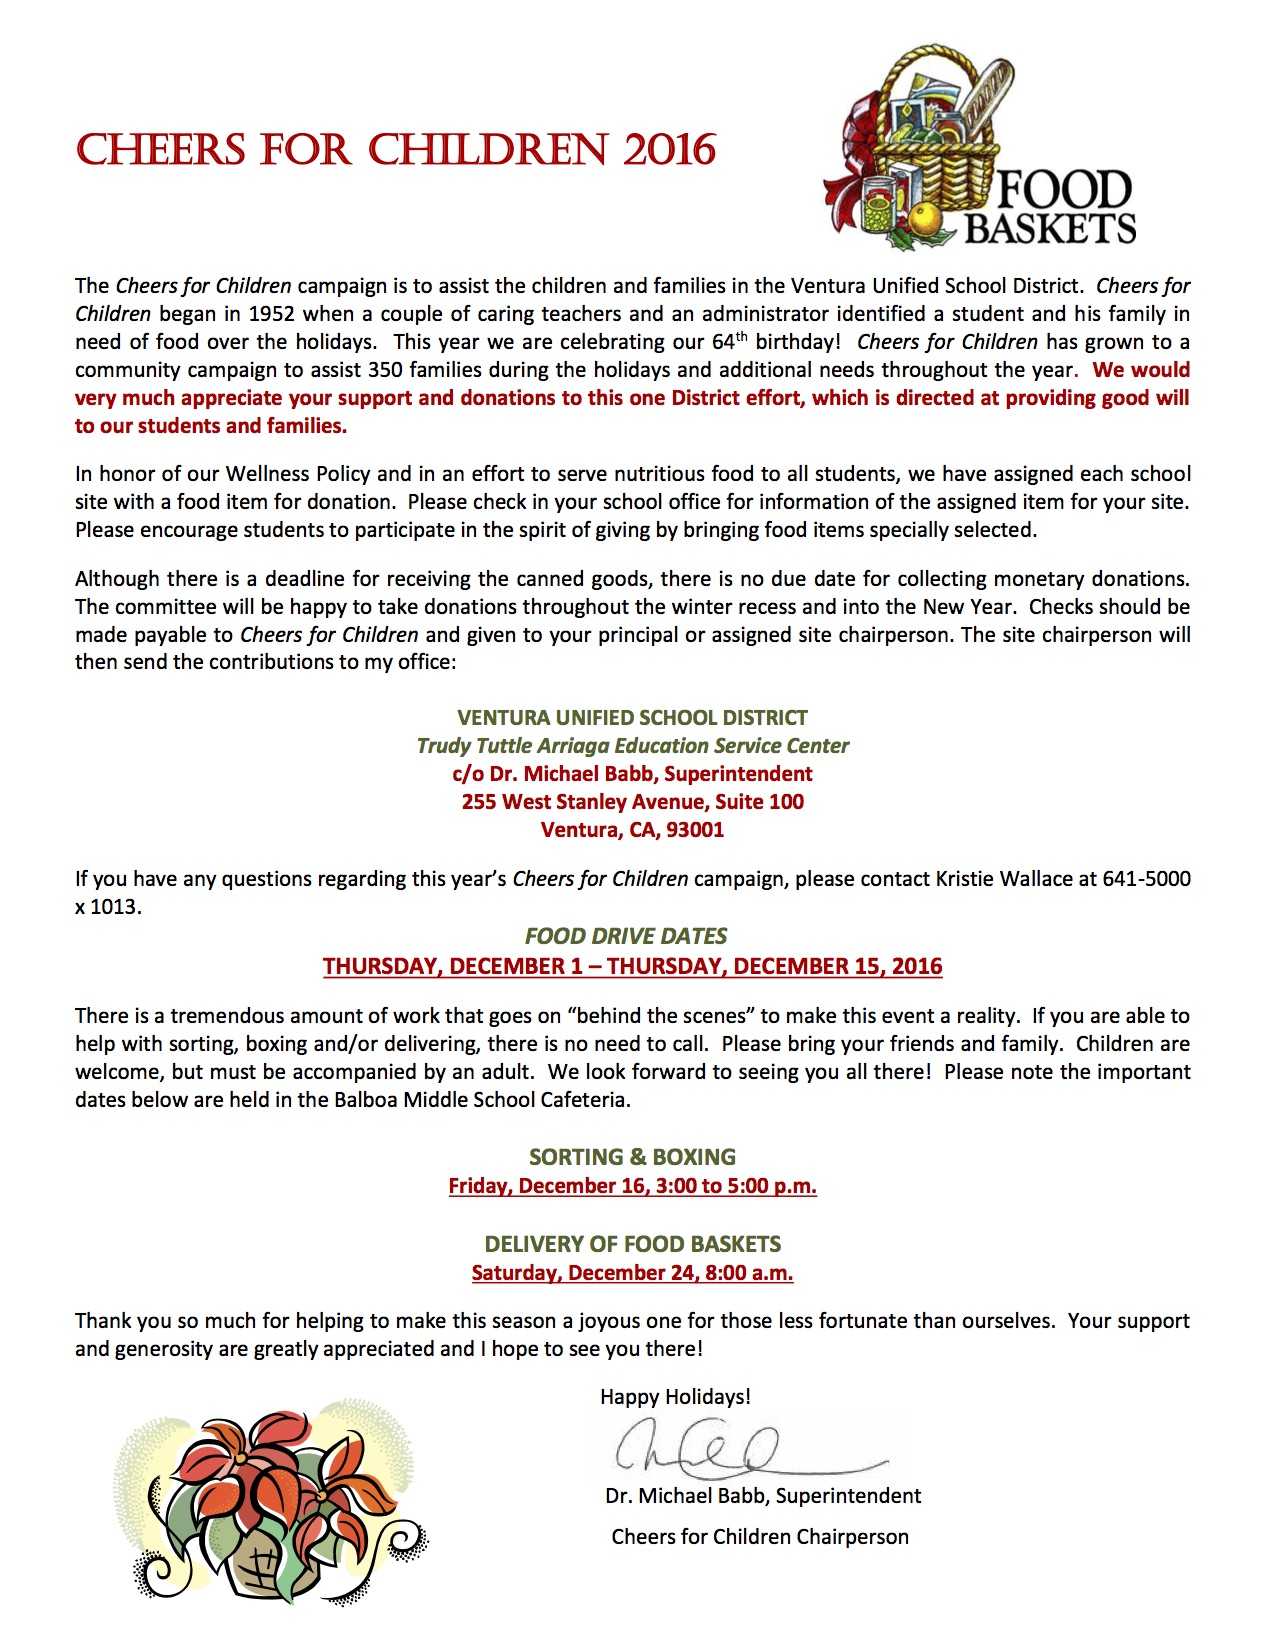 Ventura Unified's official flyer for this year's Cheers for Children food drive.